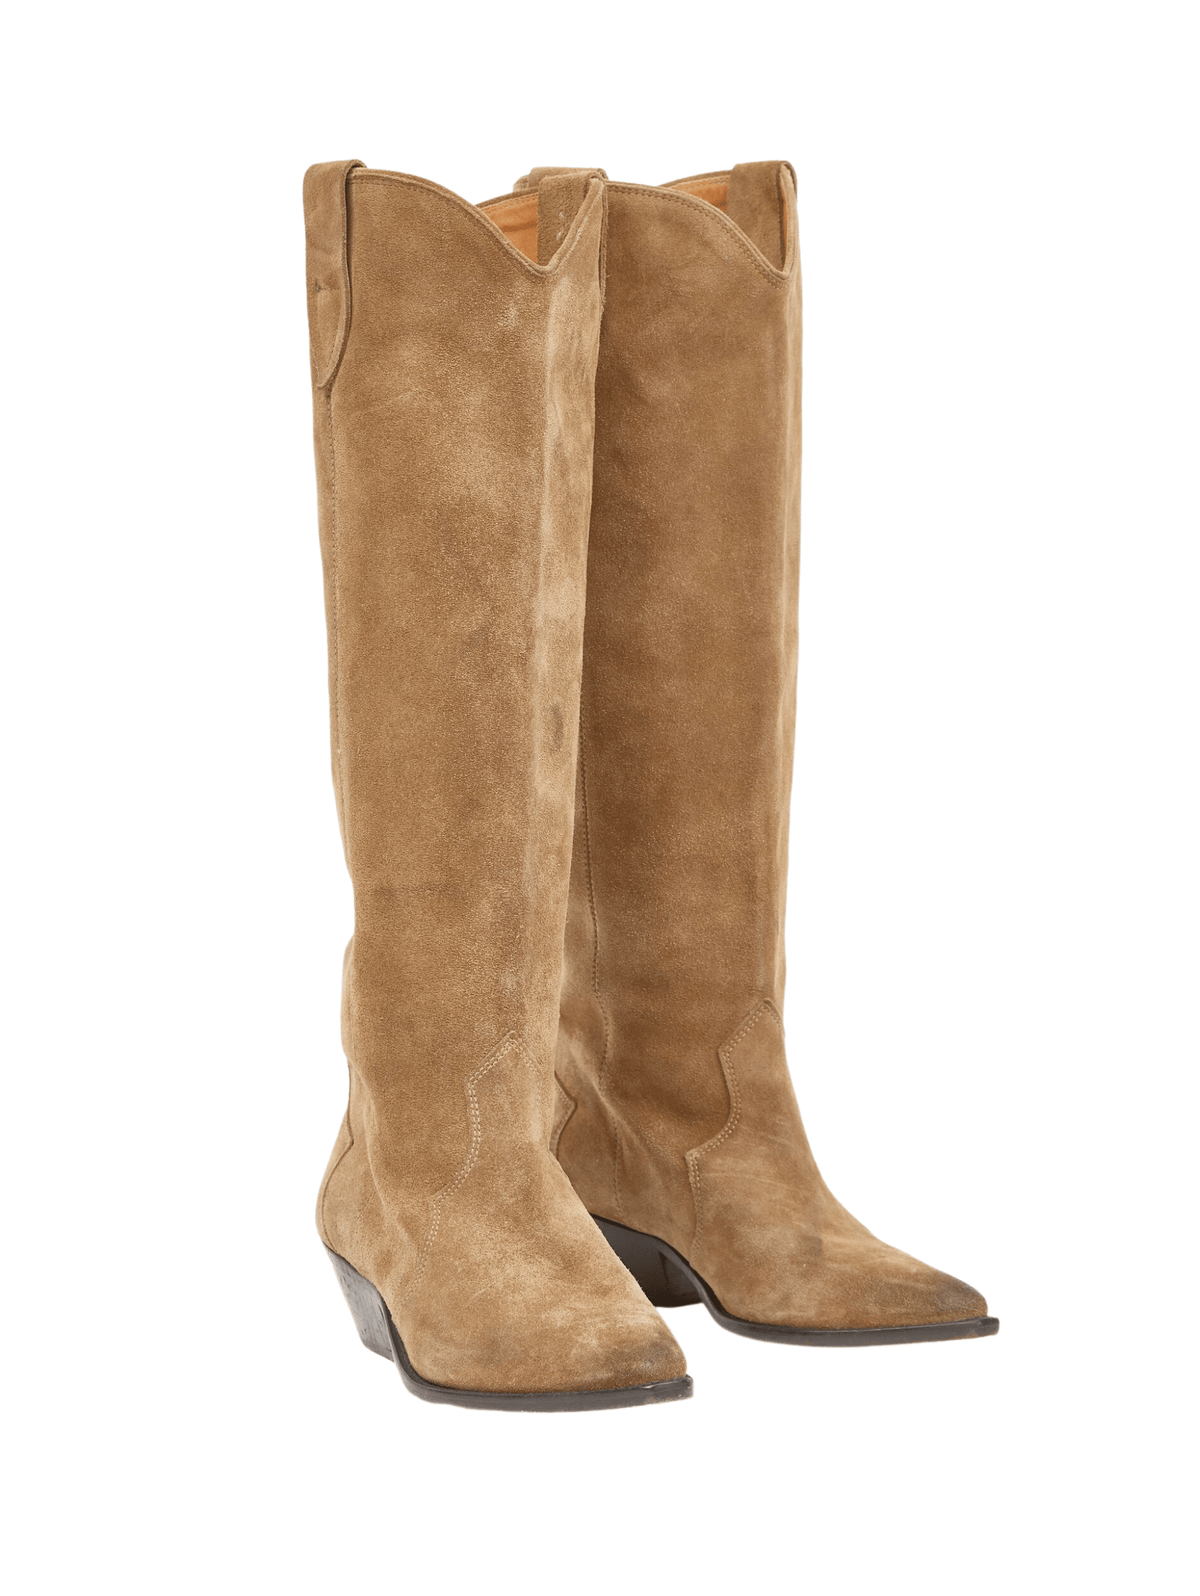 Denvee High Boots / Taupe Womens Isabel Marant 